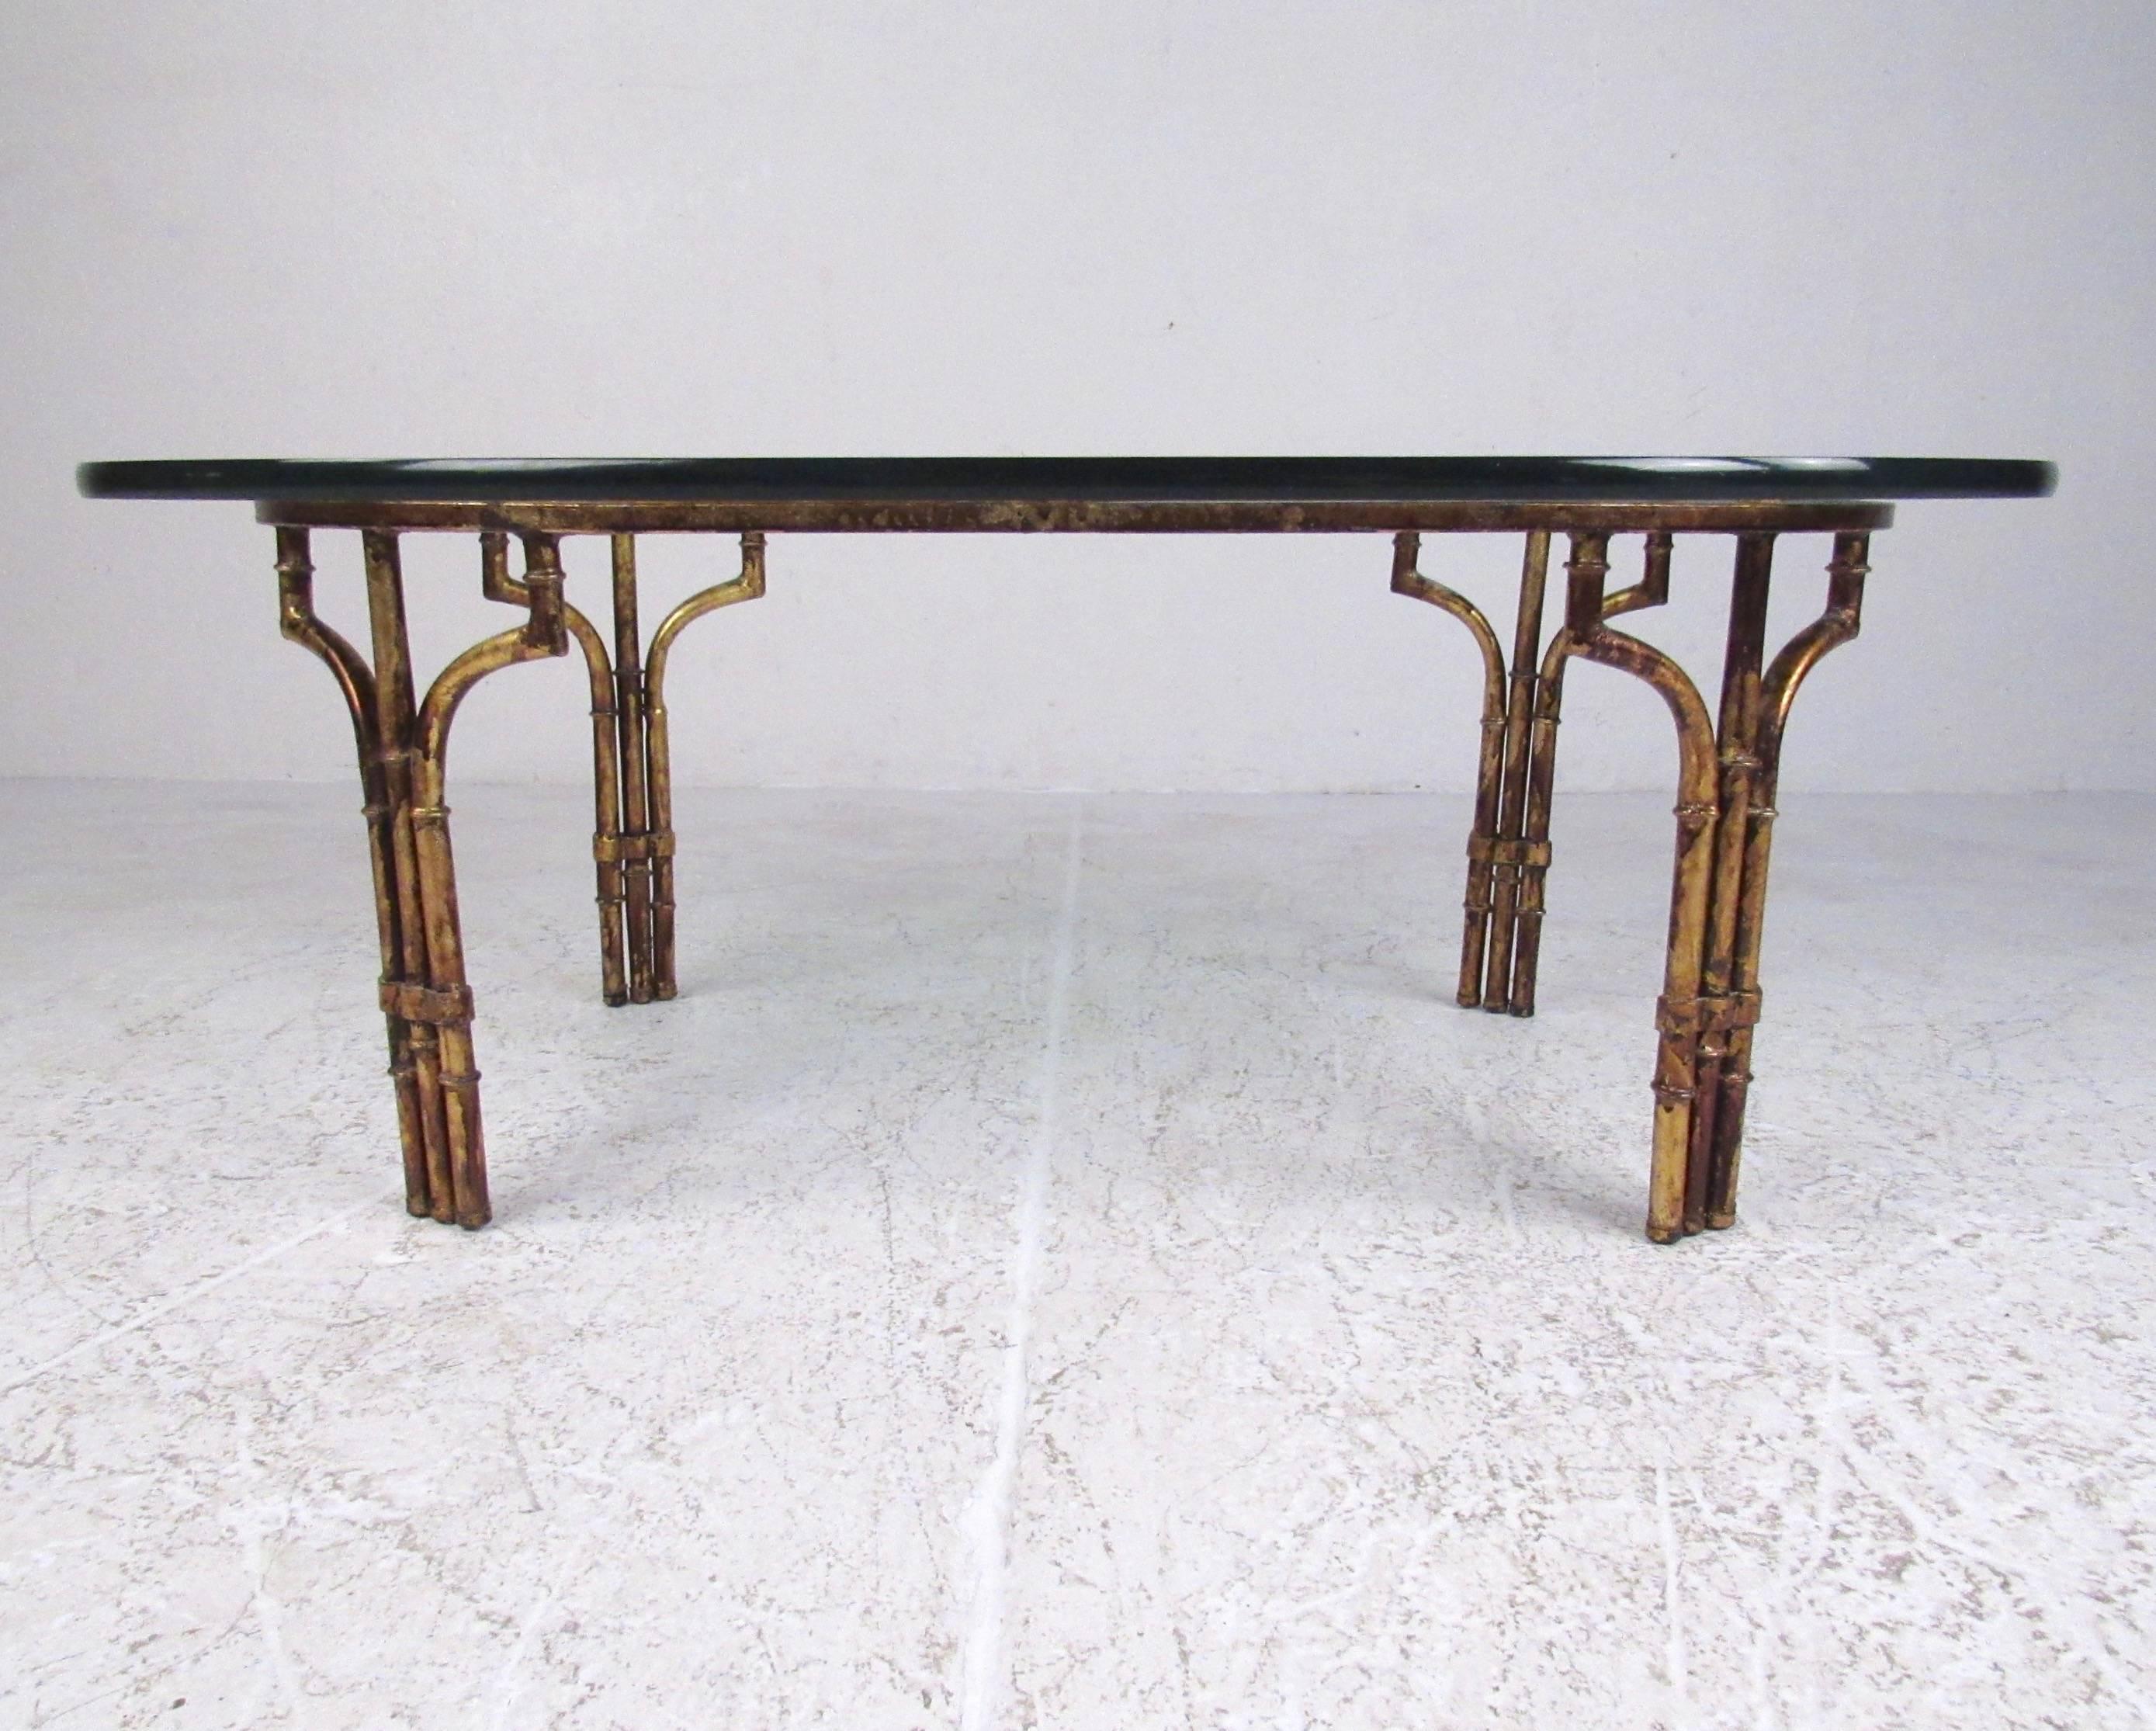 This stylish faux bamboo coffee table features a stylish gold finish base with great detail and a thick glass top. Nice size for home or office seating area, please confirm item location (NY or NJ). 